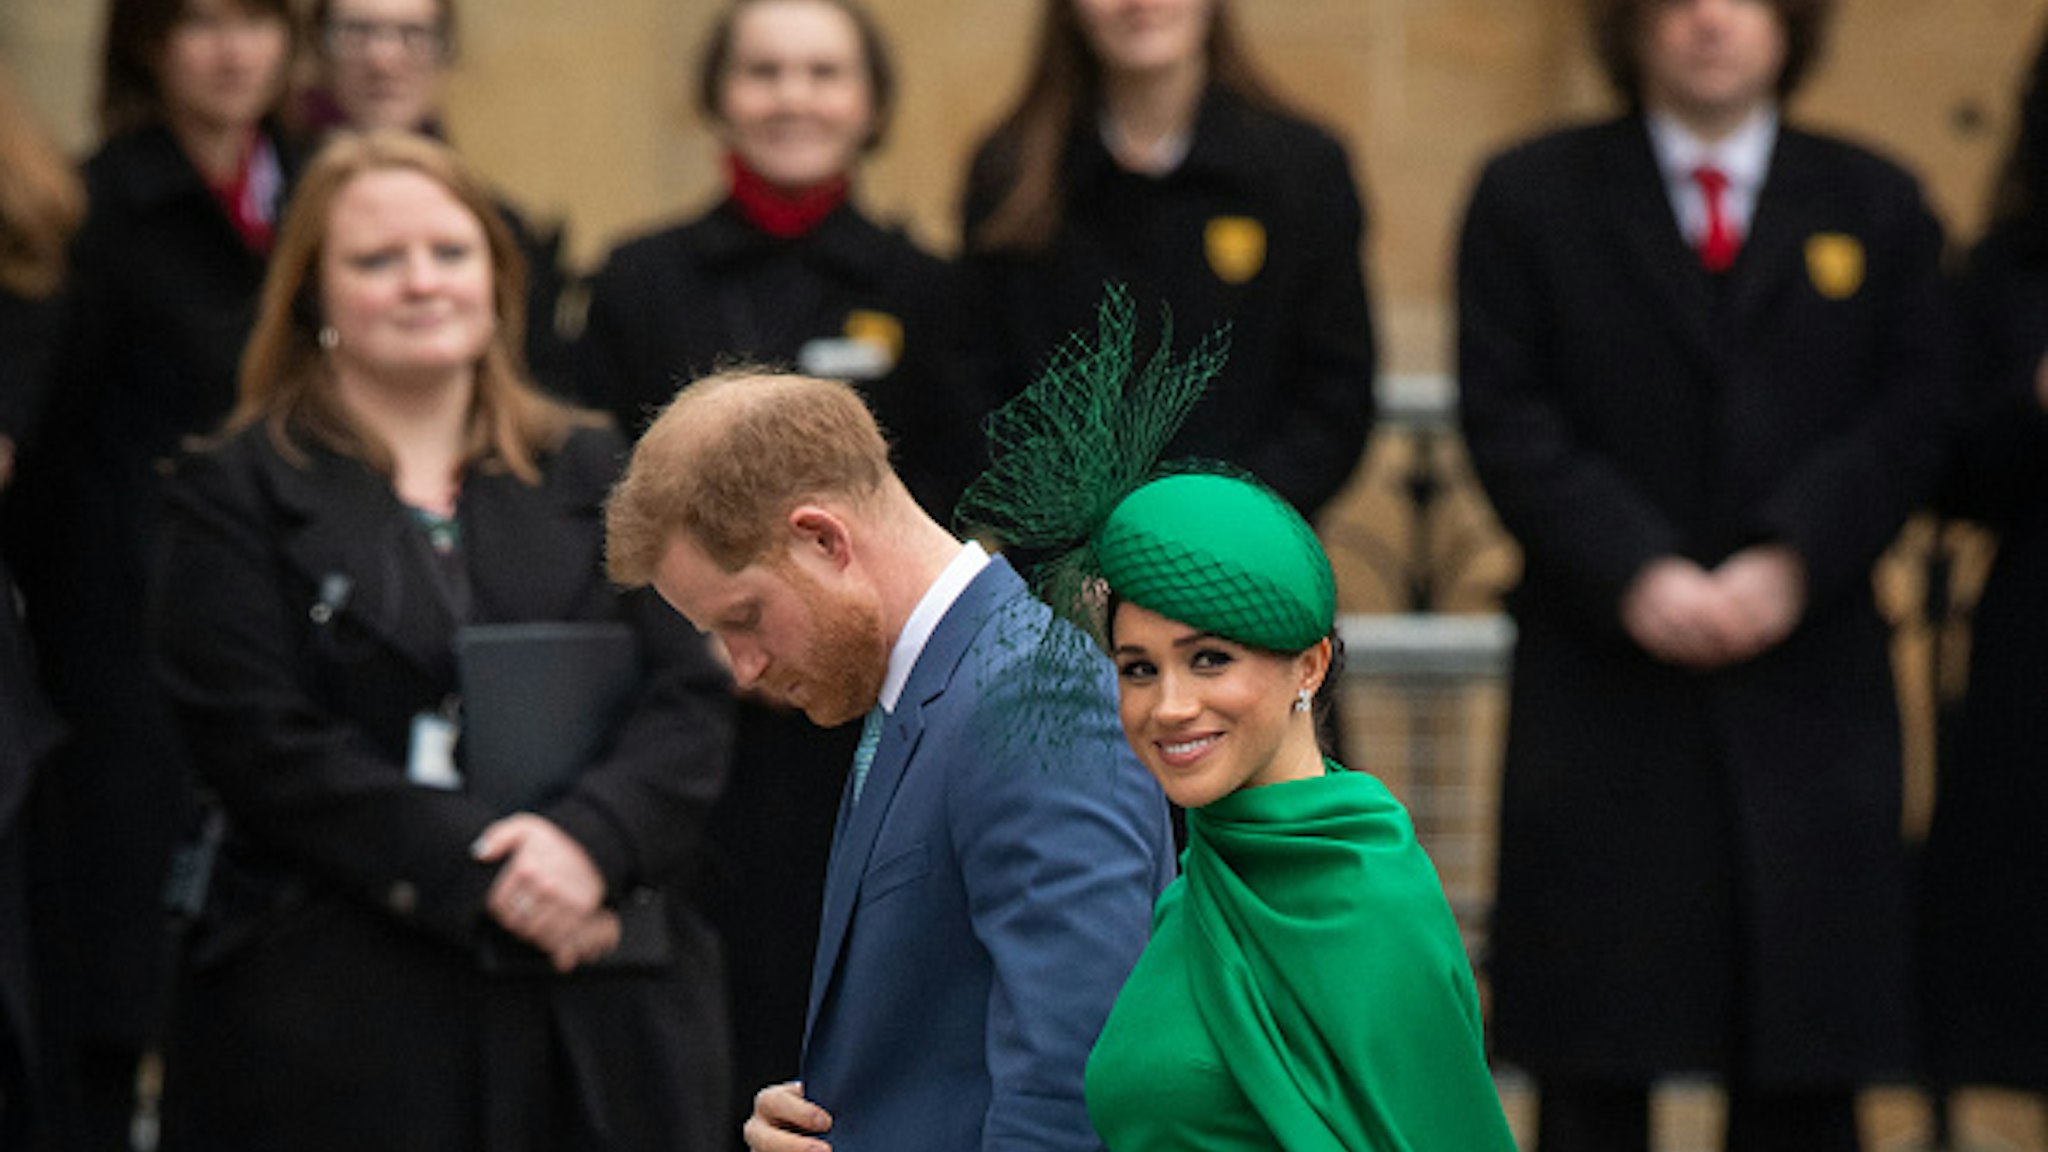 The Duke and Duchess of Sussex arrive at the Commonwealth Service at Westminster Abbey, London on Commonwealth Day. The service is their final official engagement before they quit royal life. PA Photo. Picture date: Monday March 9, 2020. See PA story ROYAL Commonwealth. Photo credit should read: Dominic Lipinski/PA Wire